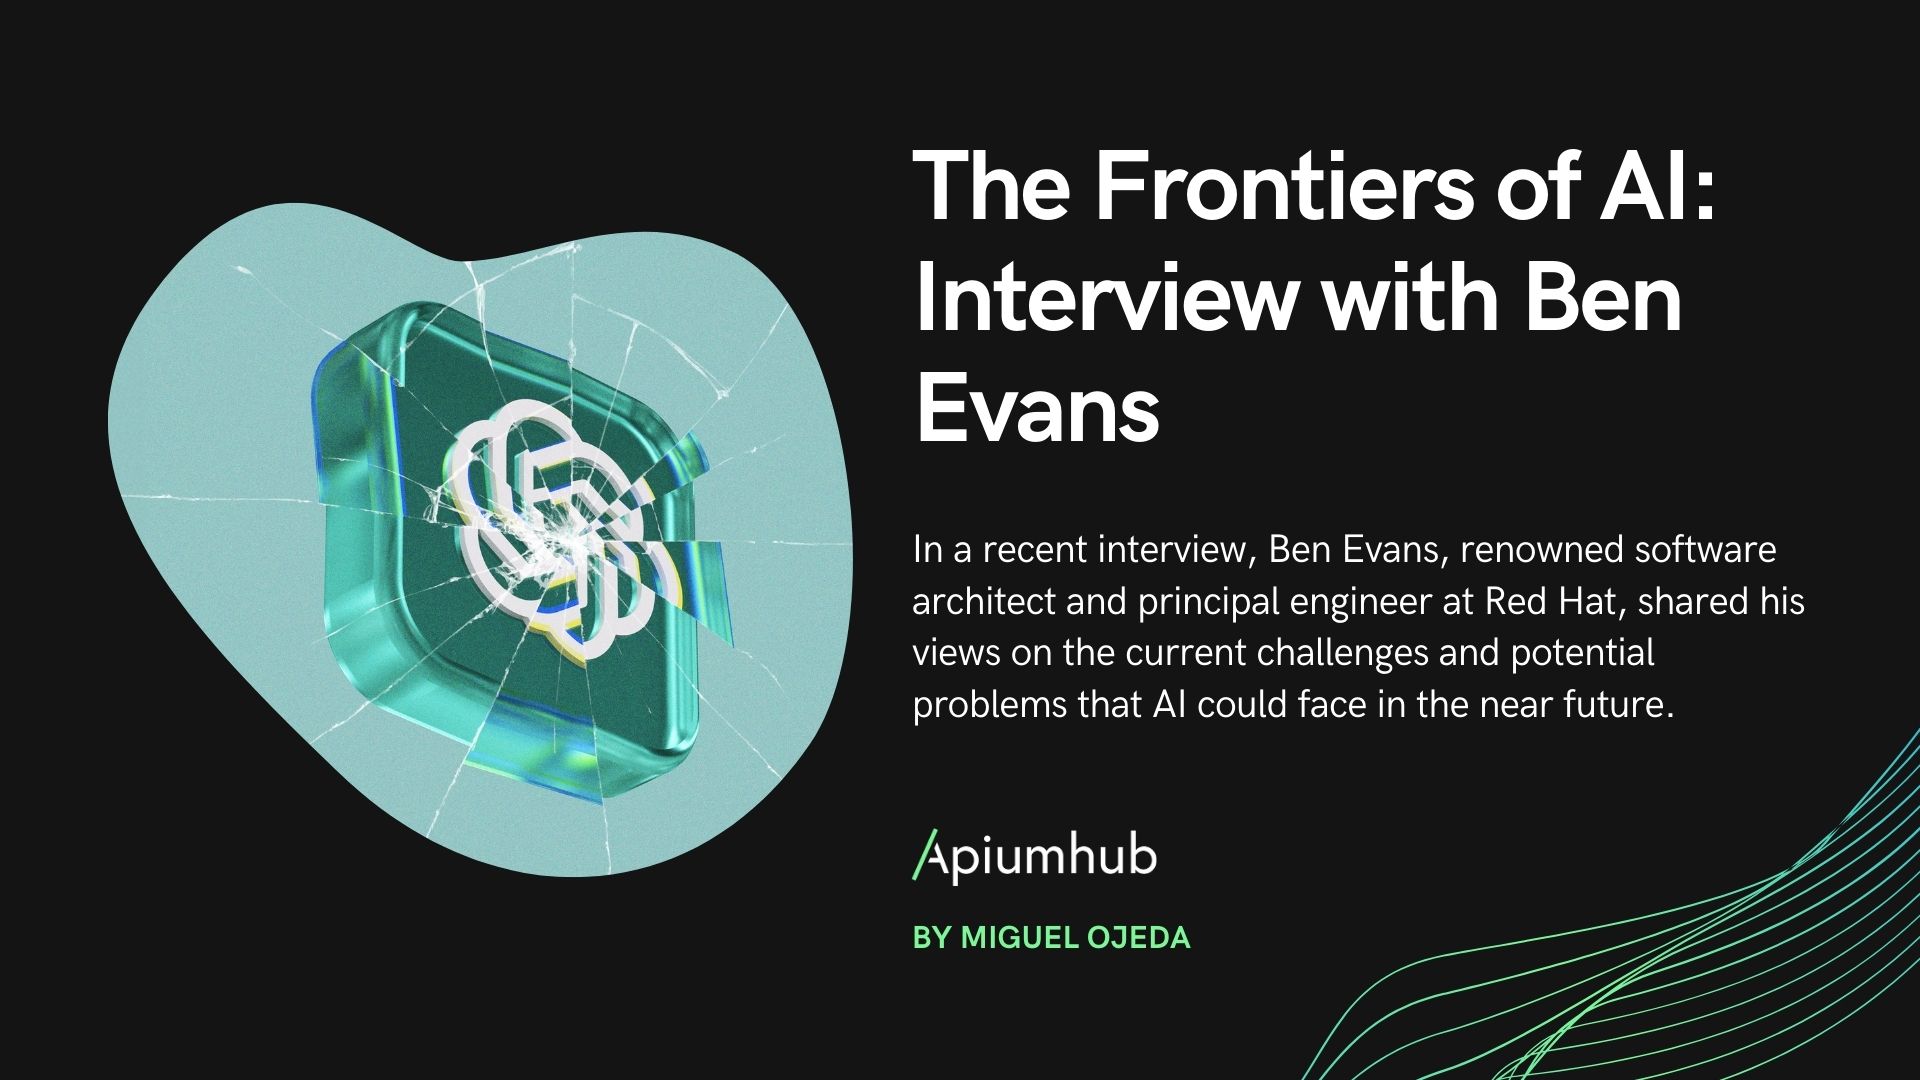 The frontiers of AI: interview with Ben Evans